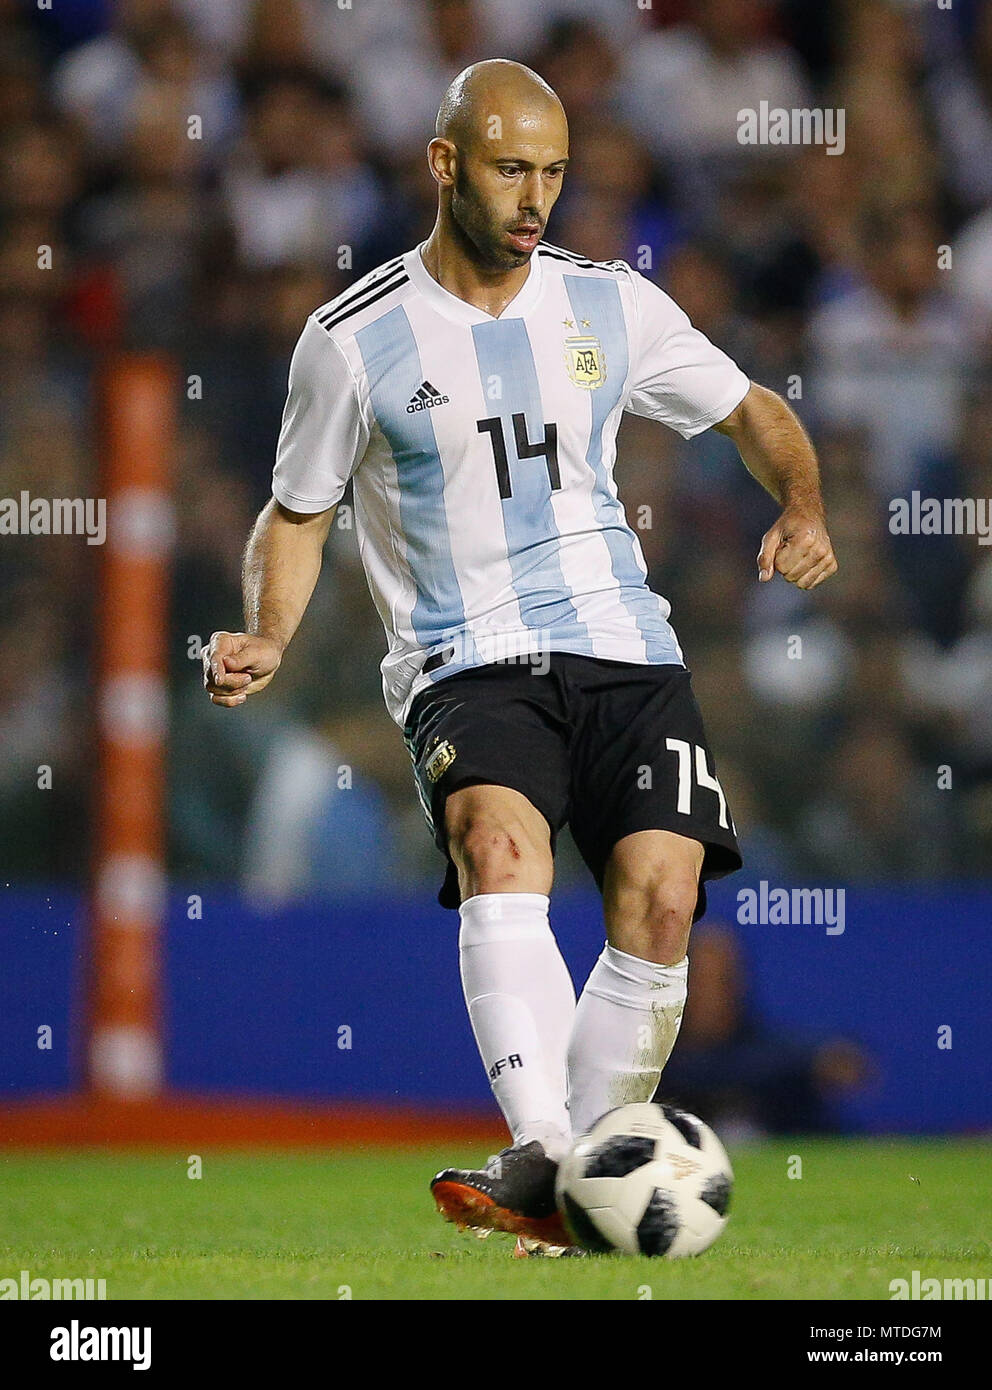 Buenos Aires, Argentina. 29th May, 2018. Javier Mascherano da Argetina during a friendly match between Argentina and Haiti, held at the Alberto José Armando Stadium, known as La Bombonera, located in the La Boca neighborhood in the capital of Buenos Aires. Credit: Marcelo Machado de Melo/FotoArena/Alamy Live News Stock Photo